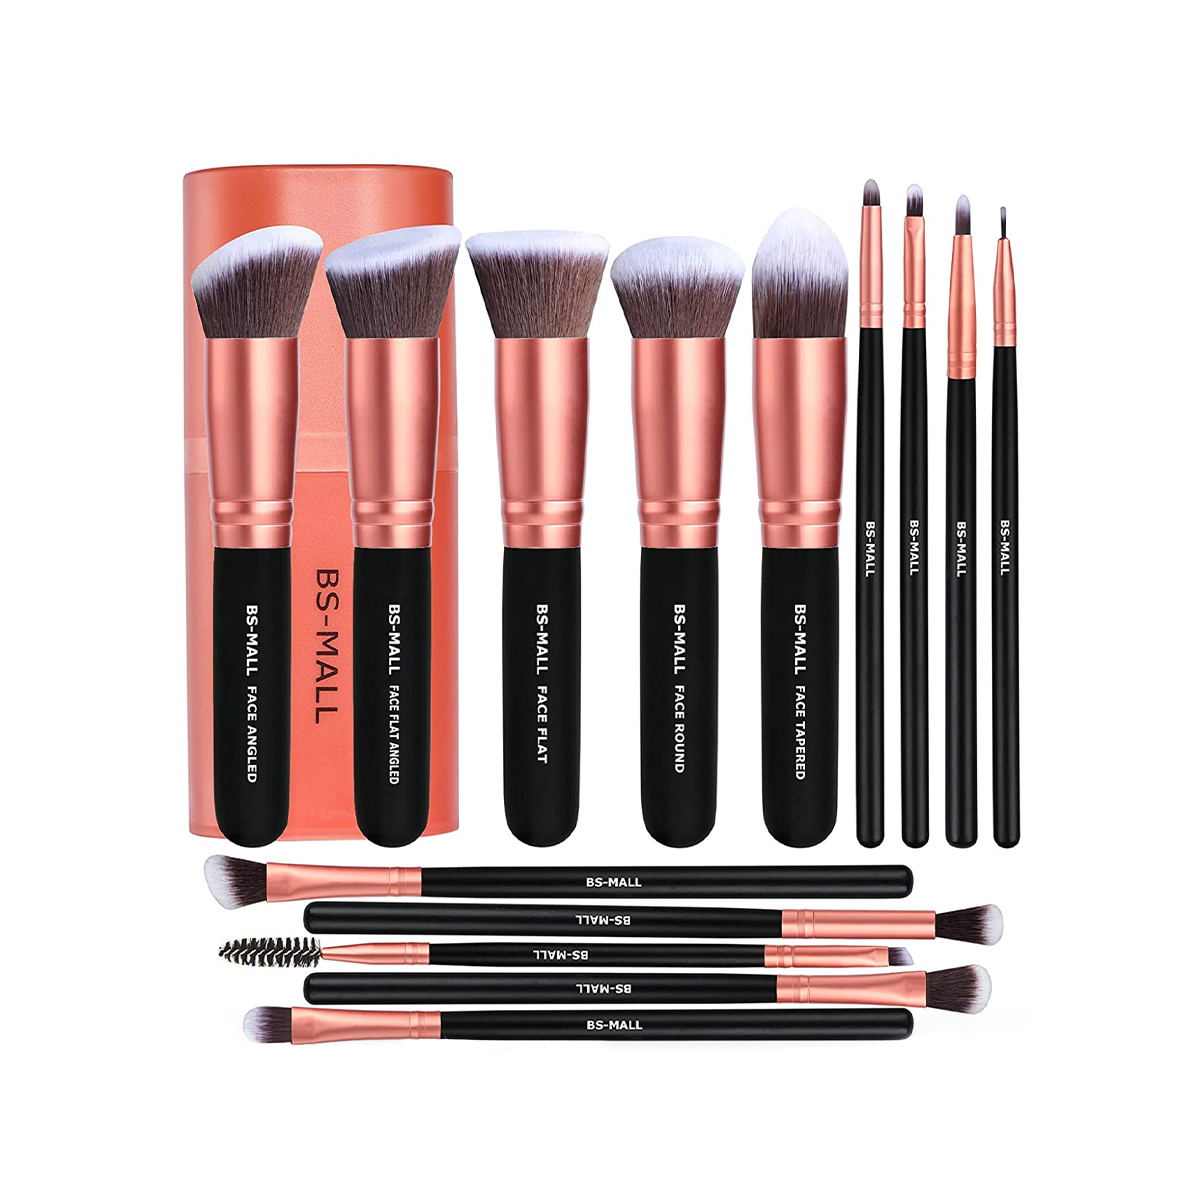 BS-Mall Makeup Brushes